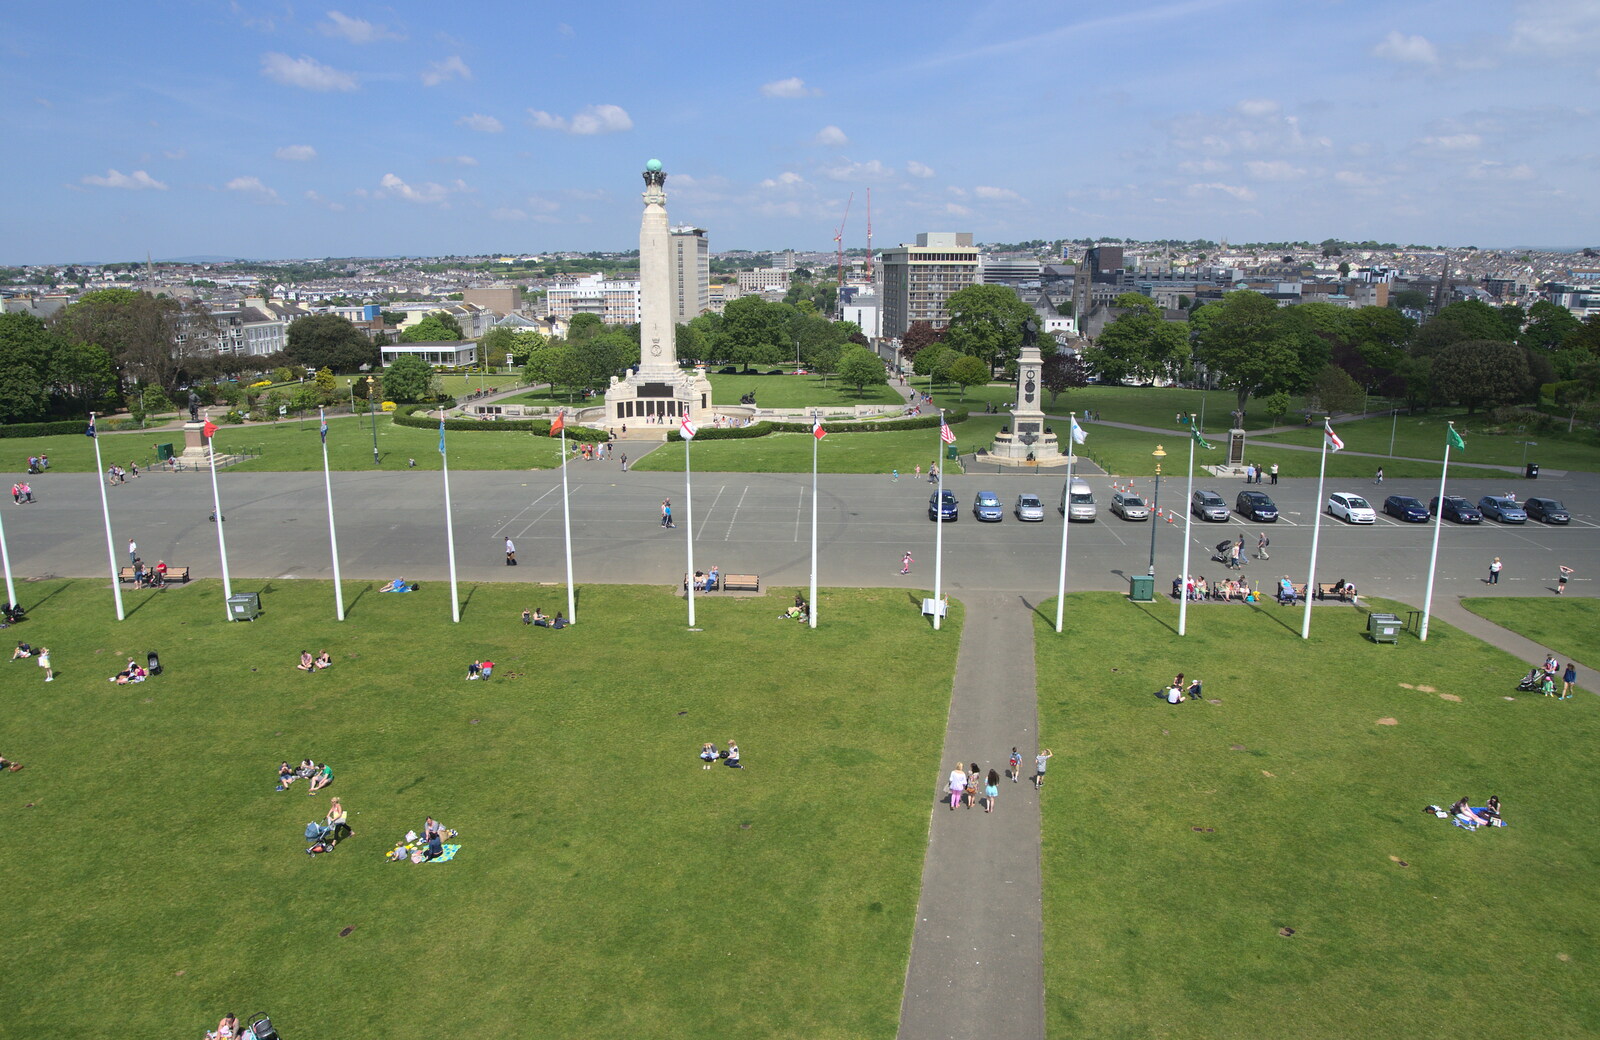 The view from the top of the lighthouse from A Tamar River Trip, Plymouth, Devon - 30th May 2016